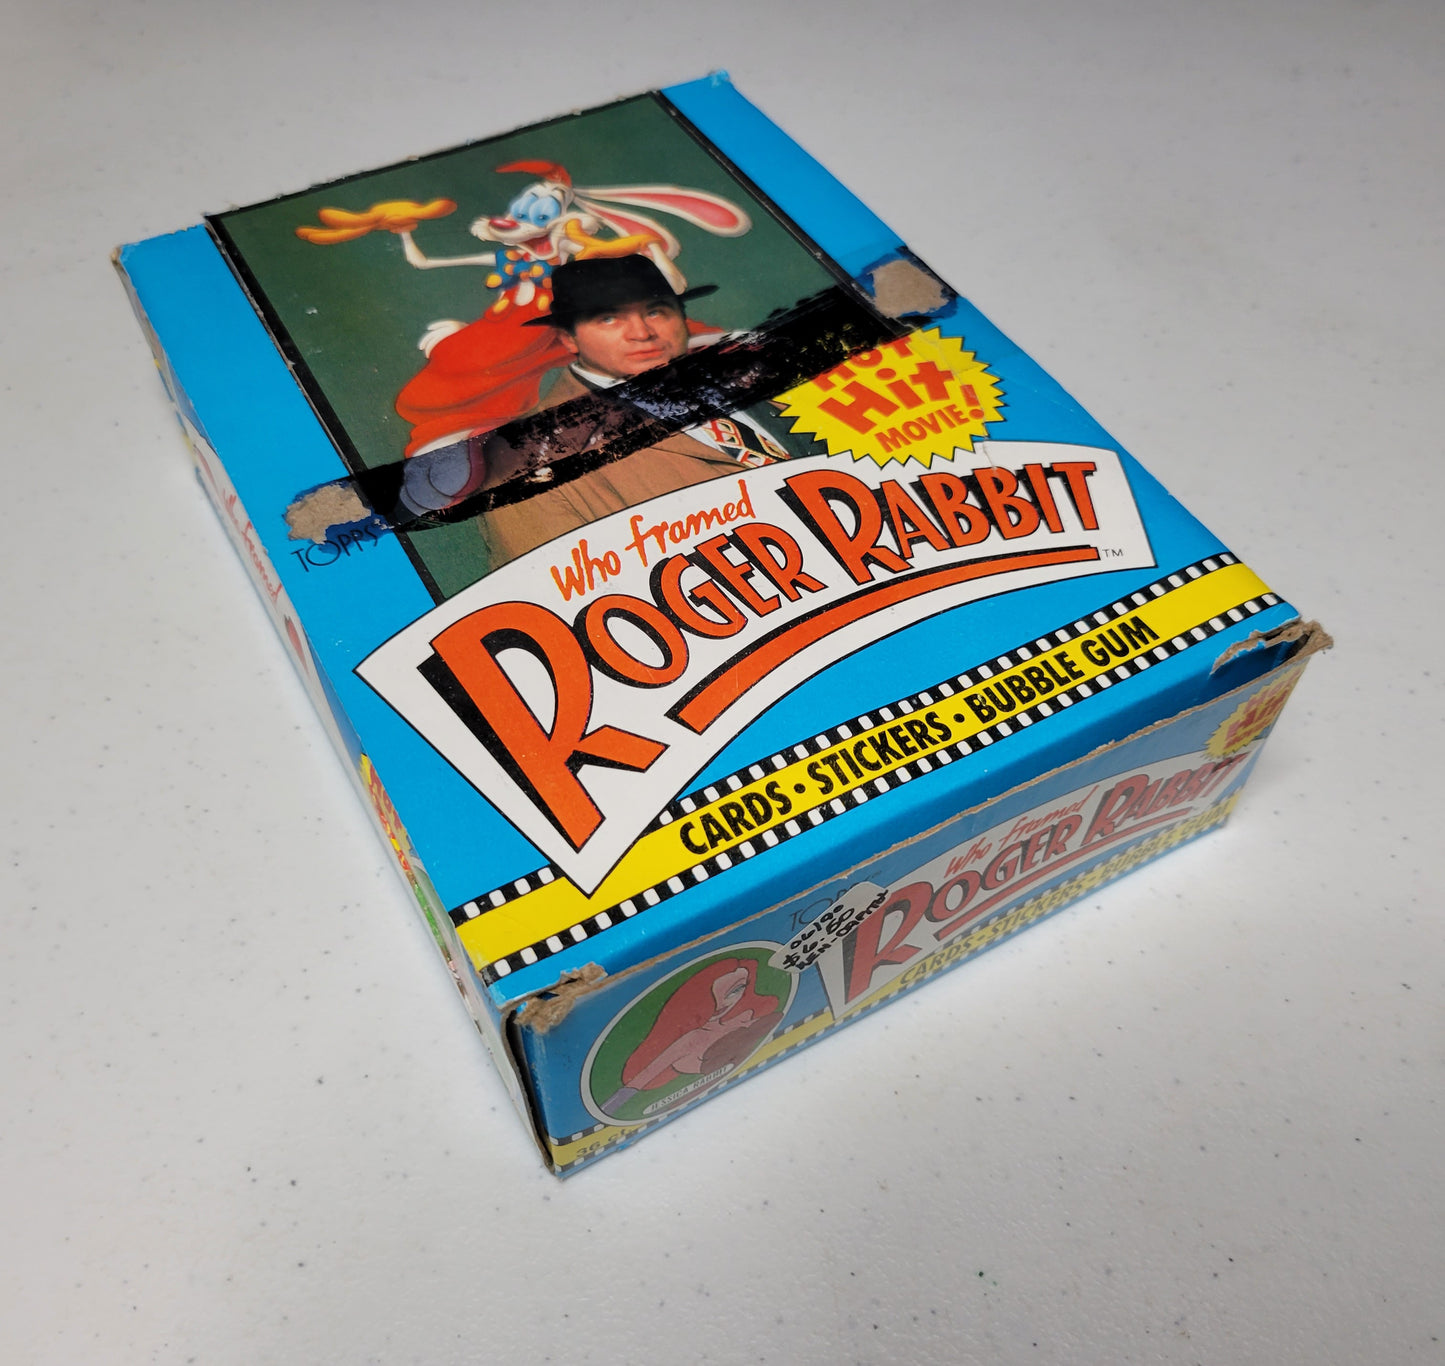 Roger Rabbit's Toon Town #1 + 1988 Trading Card Set